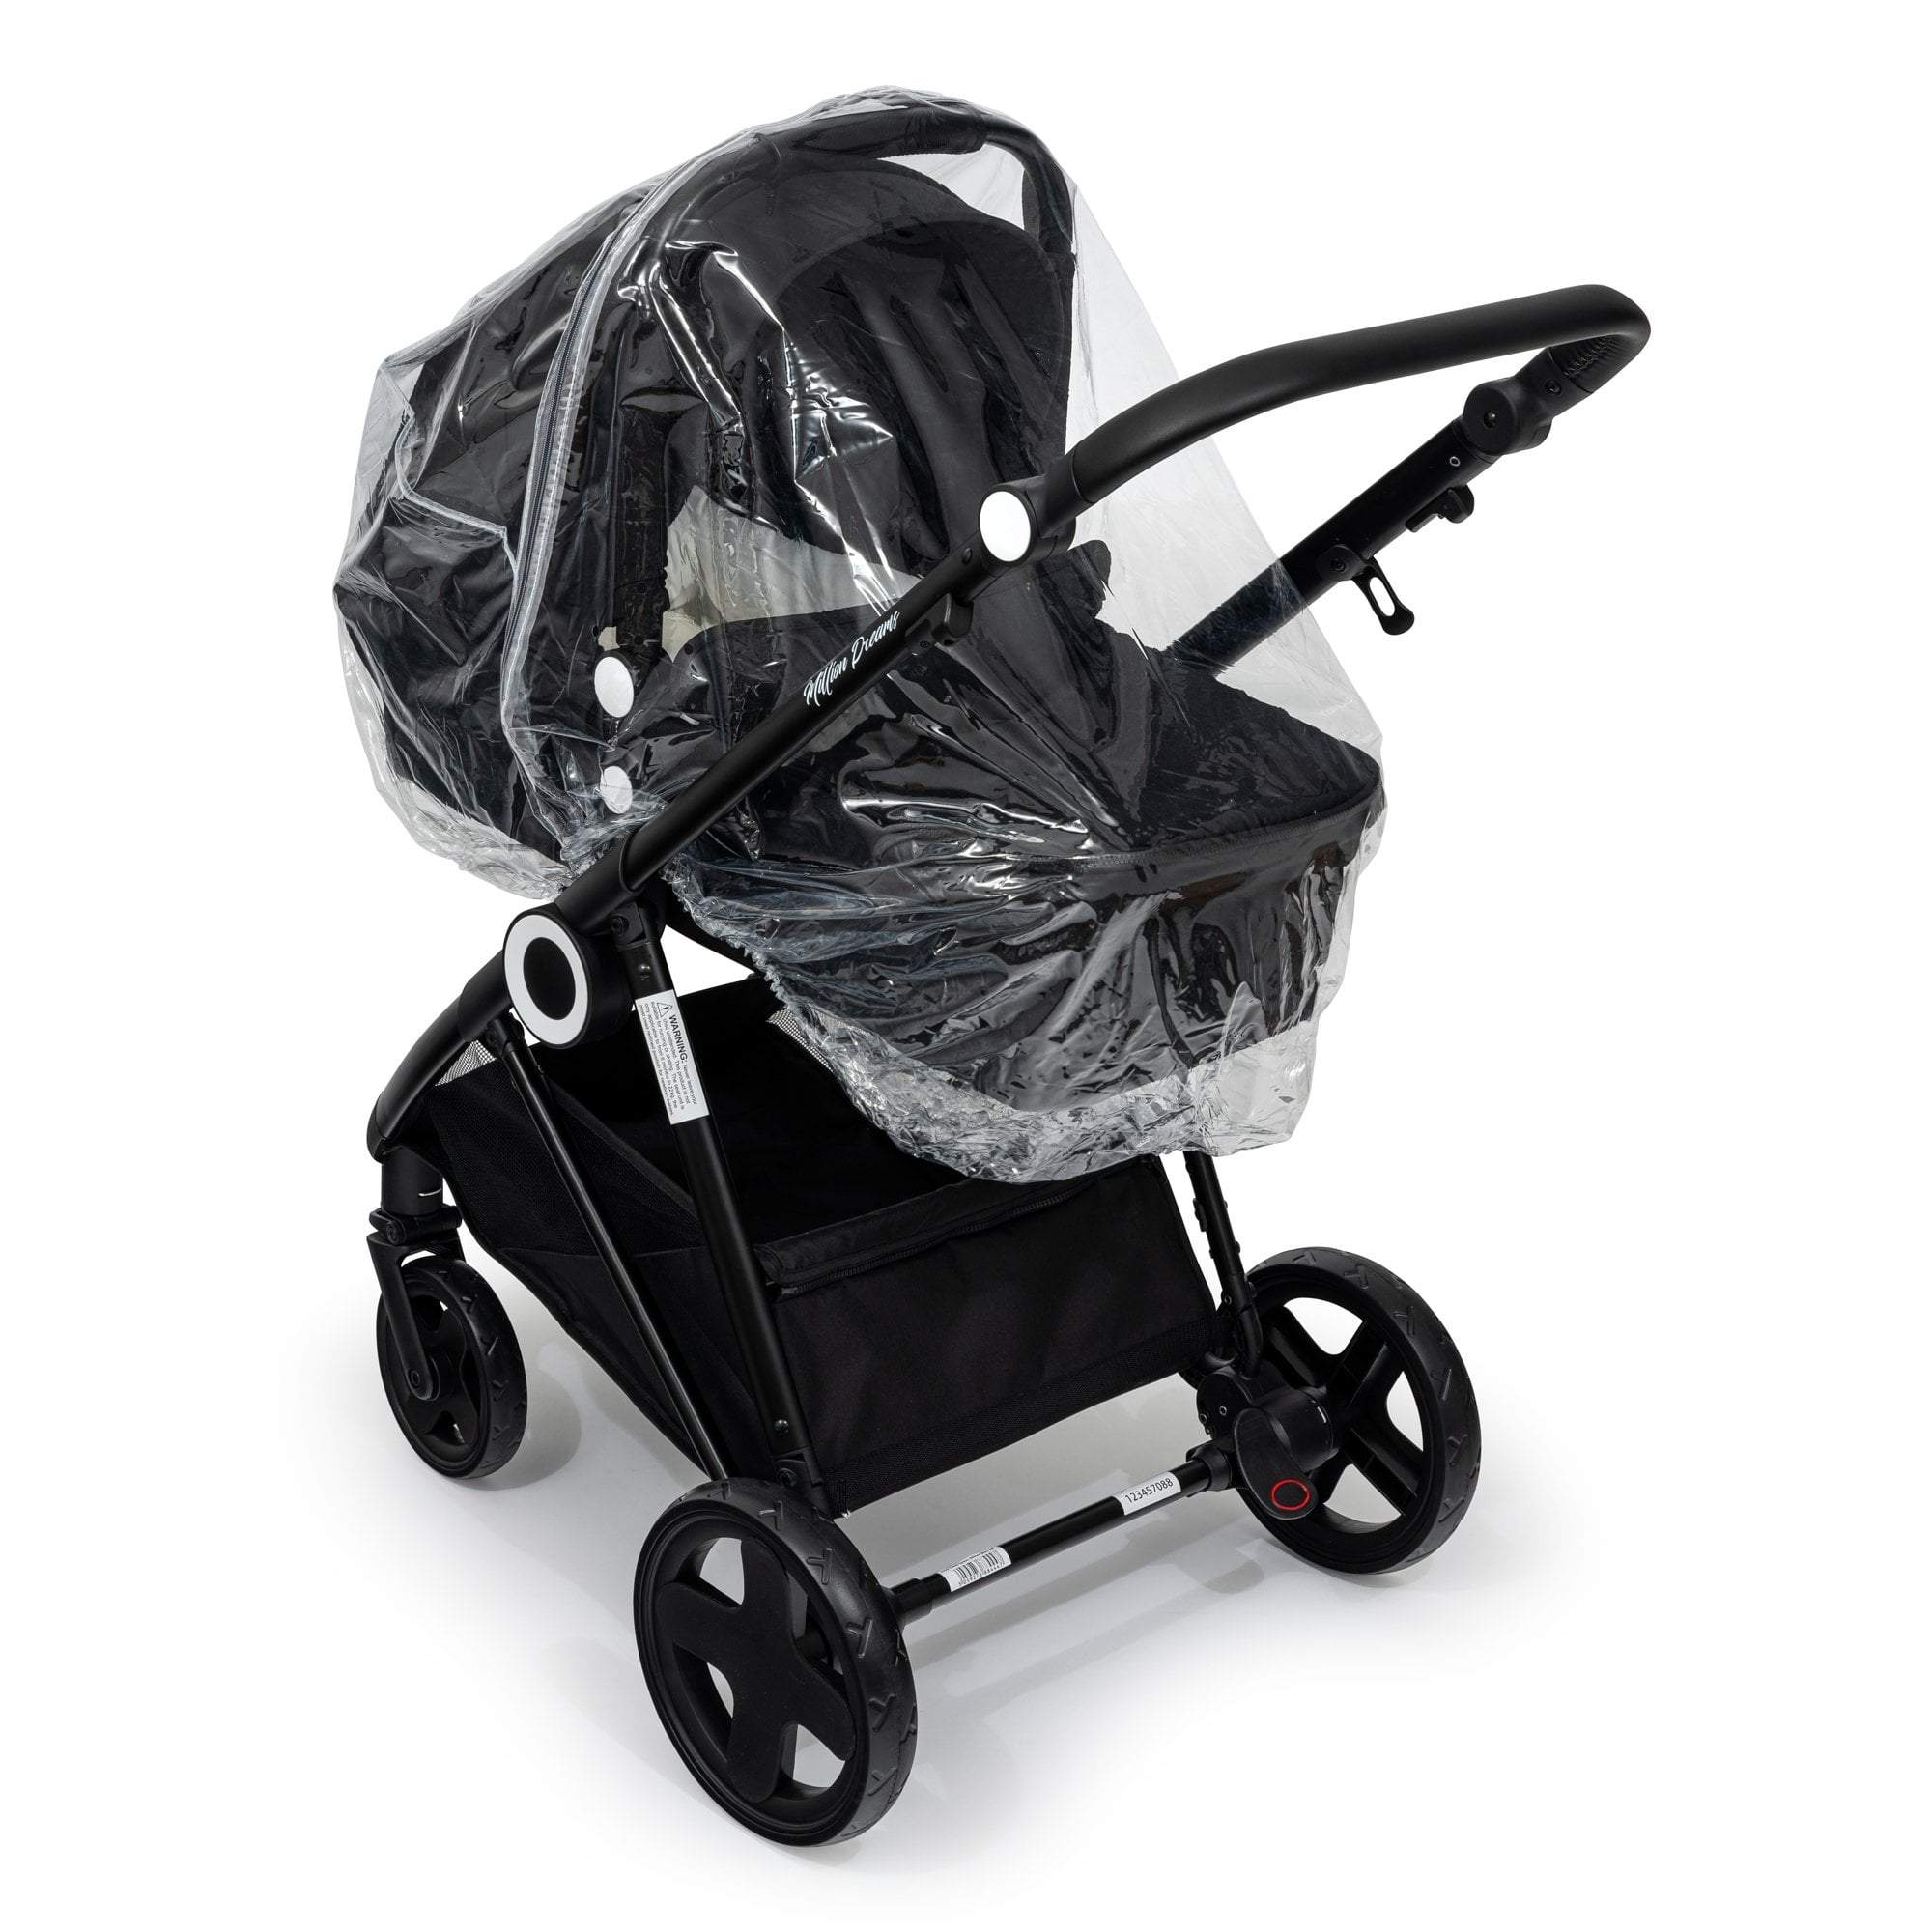 Carrycot Raincover Compatible With iCandy - Fits All Models - For Your Little One